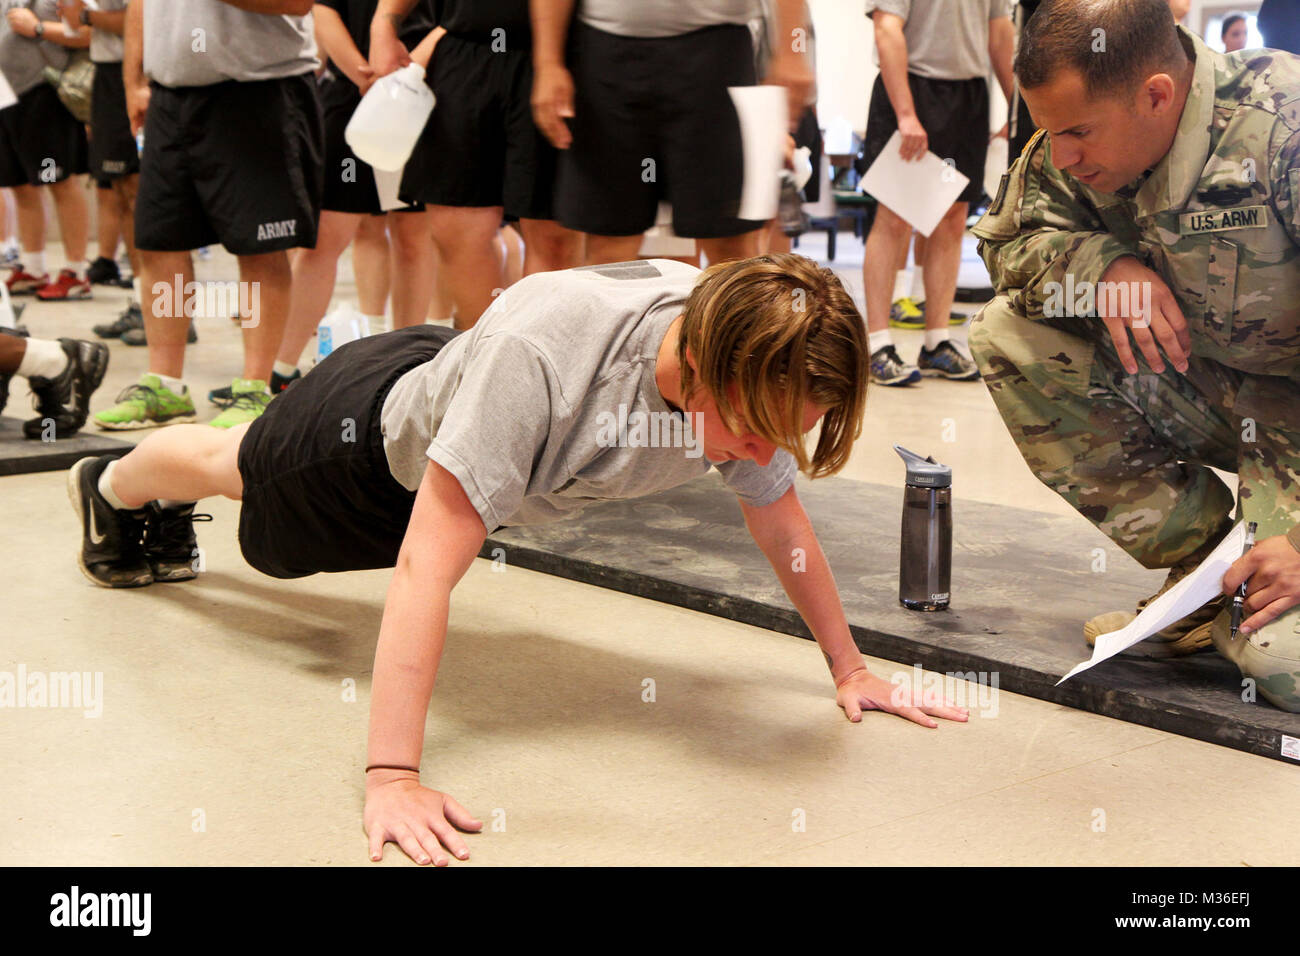 FT. INDIANTOWN GAP, PA- Army Spc. Katelyn Loveland, assigned to the 2nd Squadron, 104th Cavalry, 56th Brigade, 28th Infantry Division, a participant in the Fitness Improvement Training Program Plus (FIT-P+) and a native of Baltimore, Md., performs push ups during an Army Physical Fitness Test while her grader, Sgt. 1st Class Victor Arocho observes Aug. 19, 2016. Loveland said she enjoyed learning about the areas in her lifestyle that needed healthy changes, such as calorie intake portion control. (U.S. Army National Guard photo by Sgt. 1st Class HollyAnn Nicom, 109th Mobile Public Affairs Deta Stock Photo